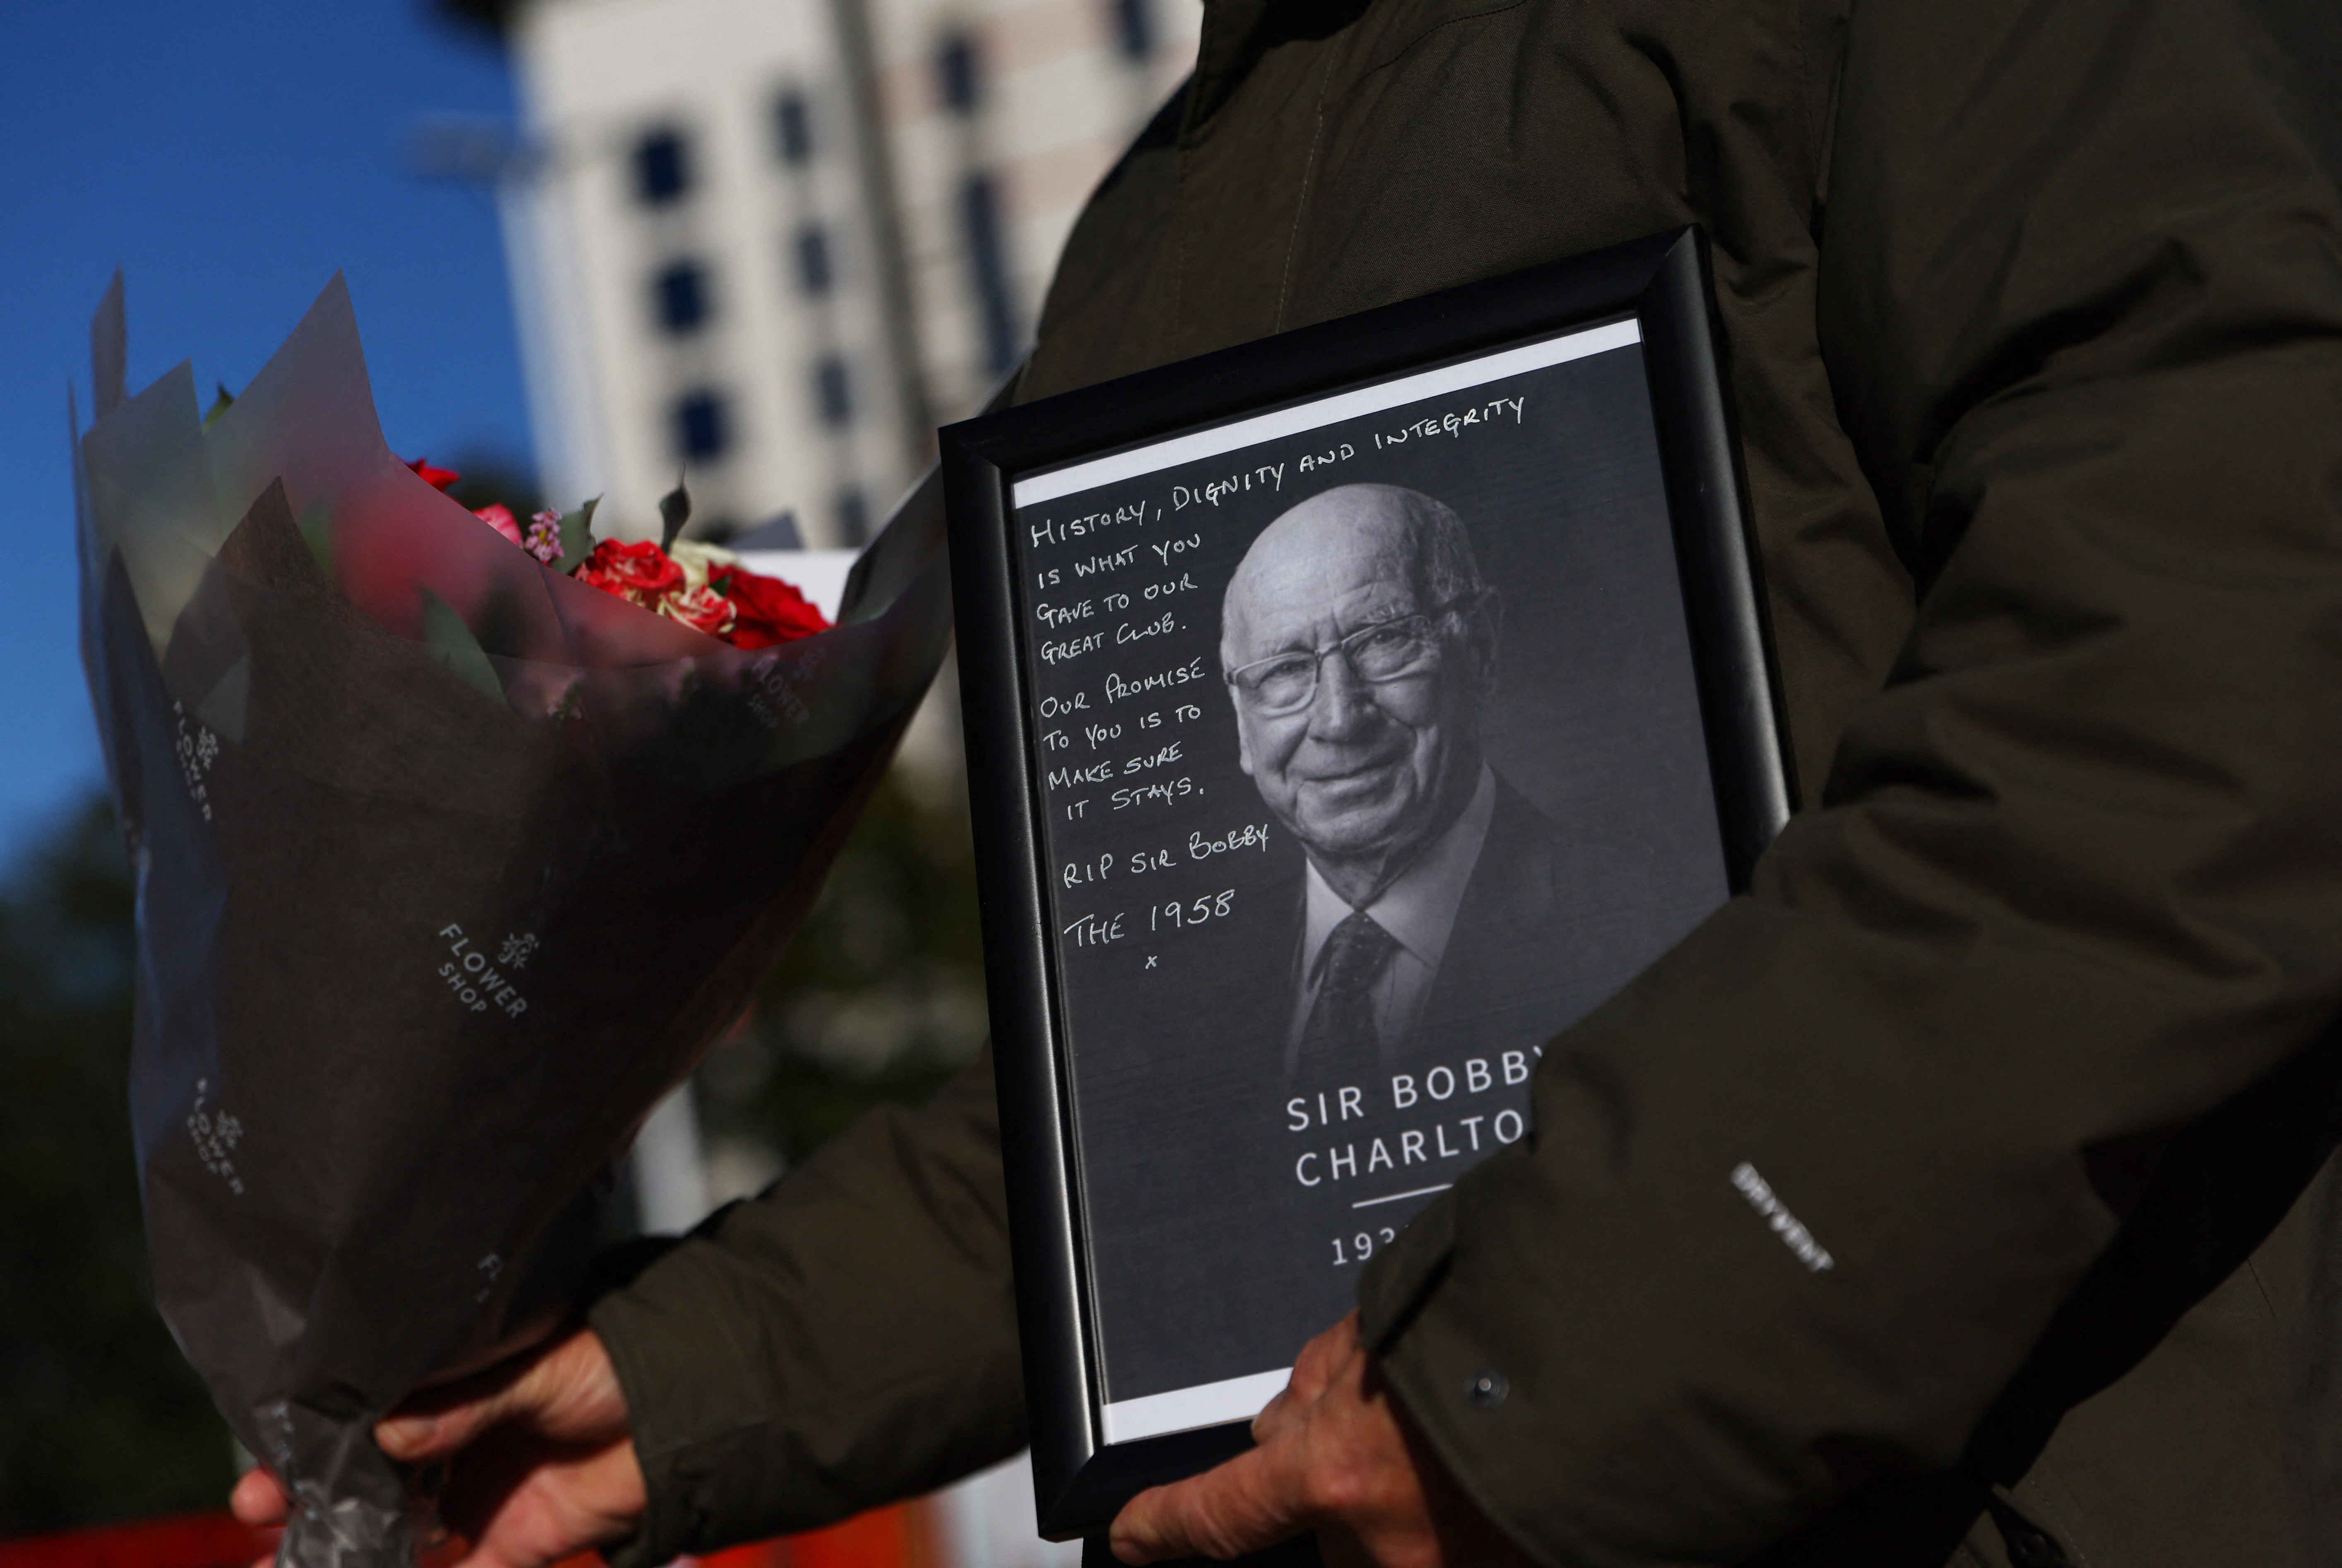 Fans pay tribute to Bobby Charlton at Old Trafford | Reuters